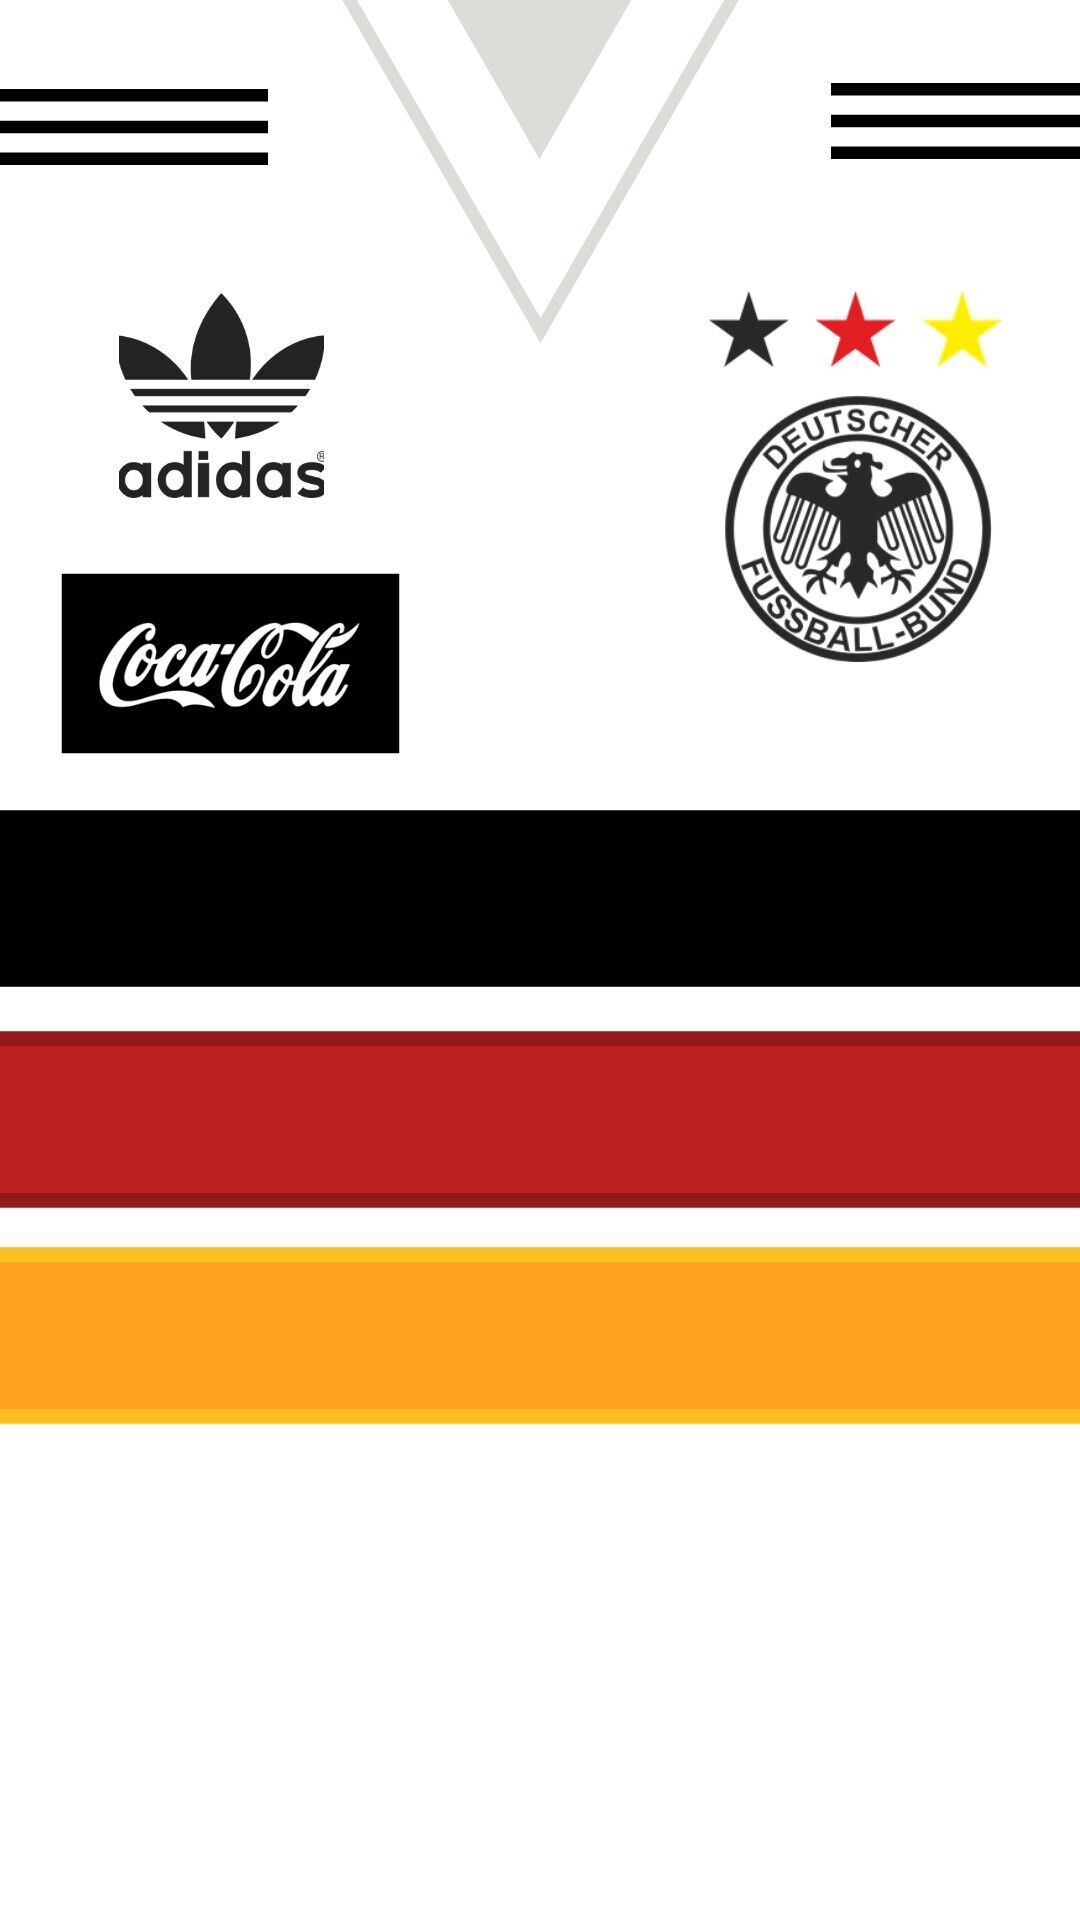 Germany National Football Team: Minimalistic sports uniform kit used by international soccer players in Germany. 1080x1920 Full HD Background.